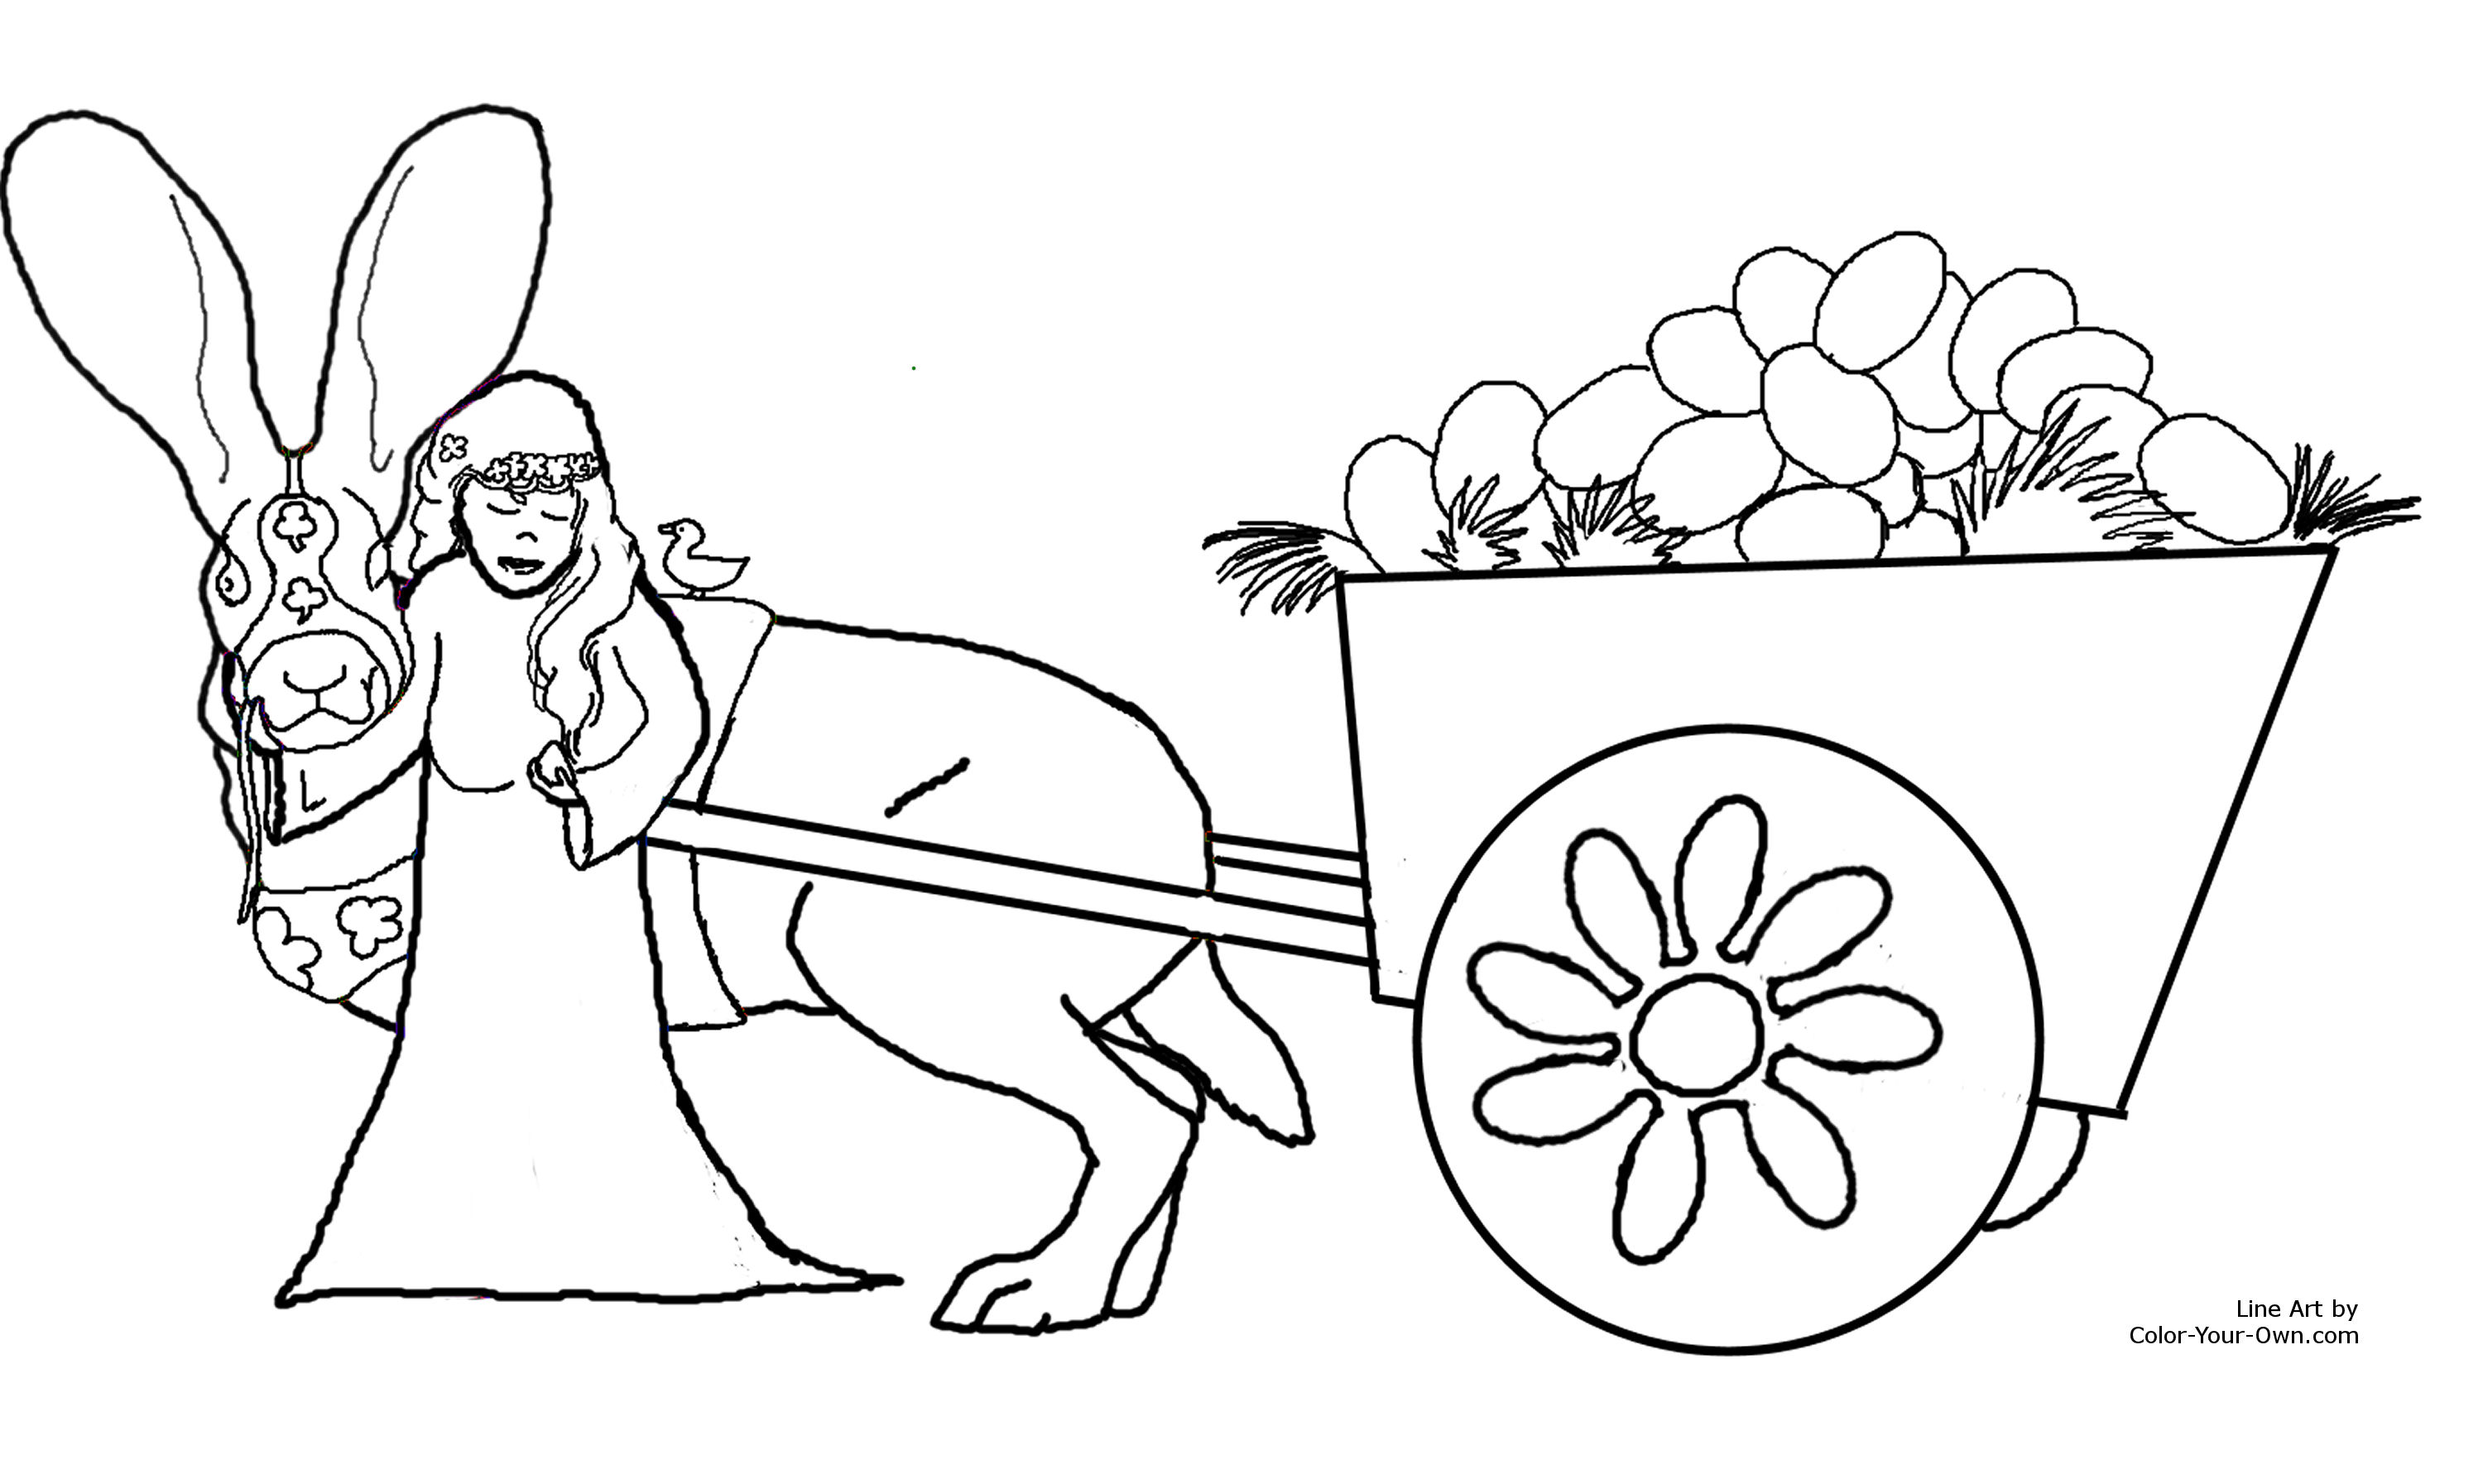 Make Your Own Coloring Pages From Photos Free at GetColorings.com